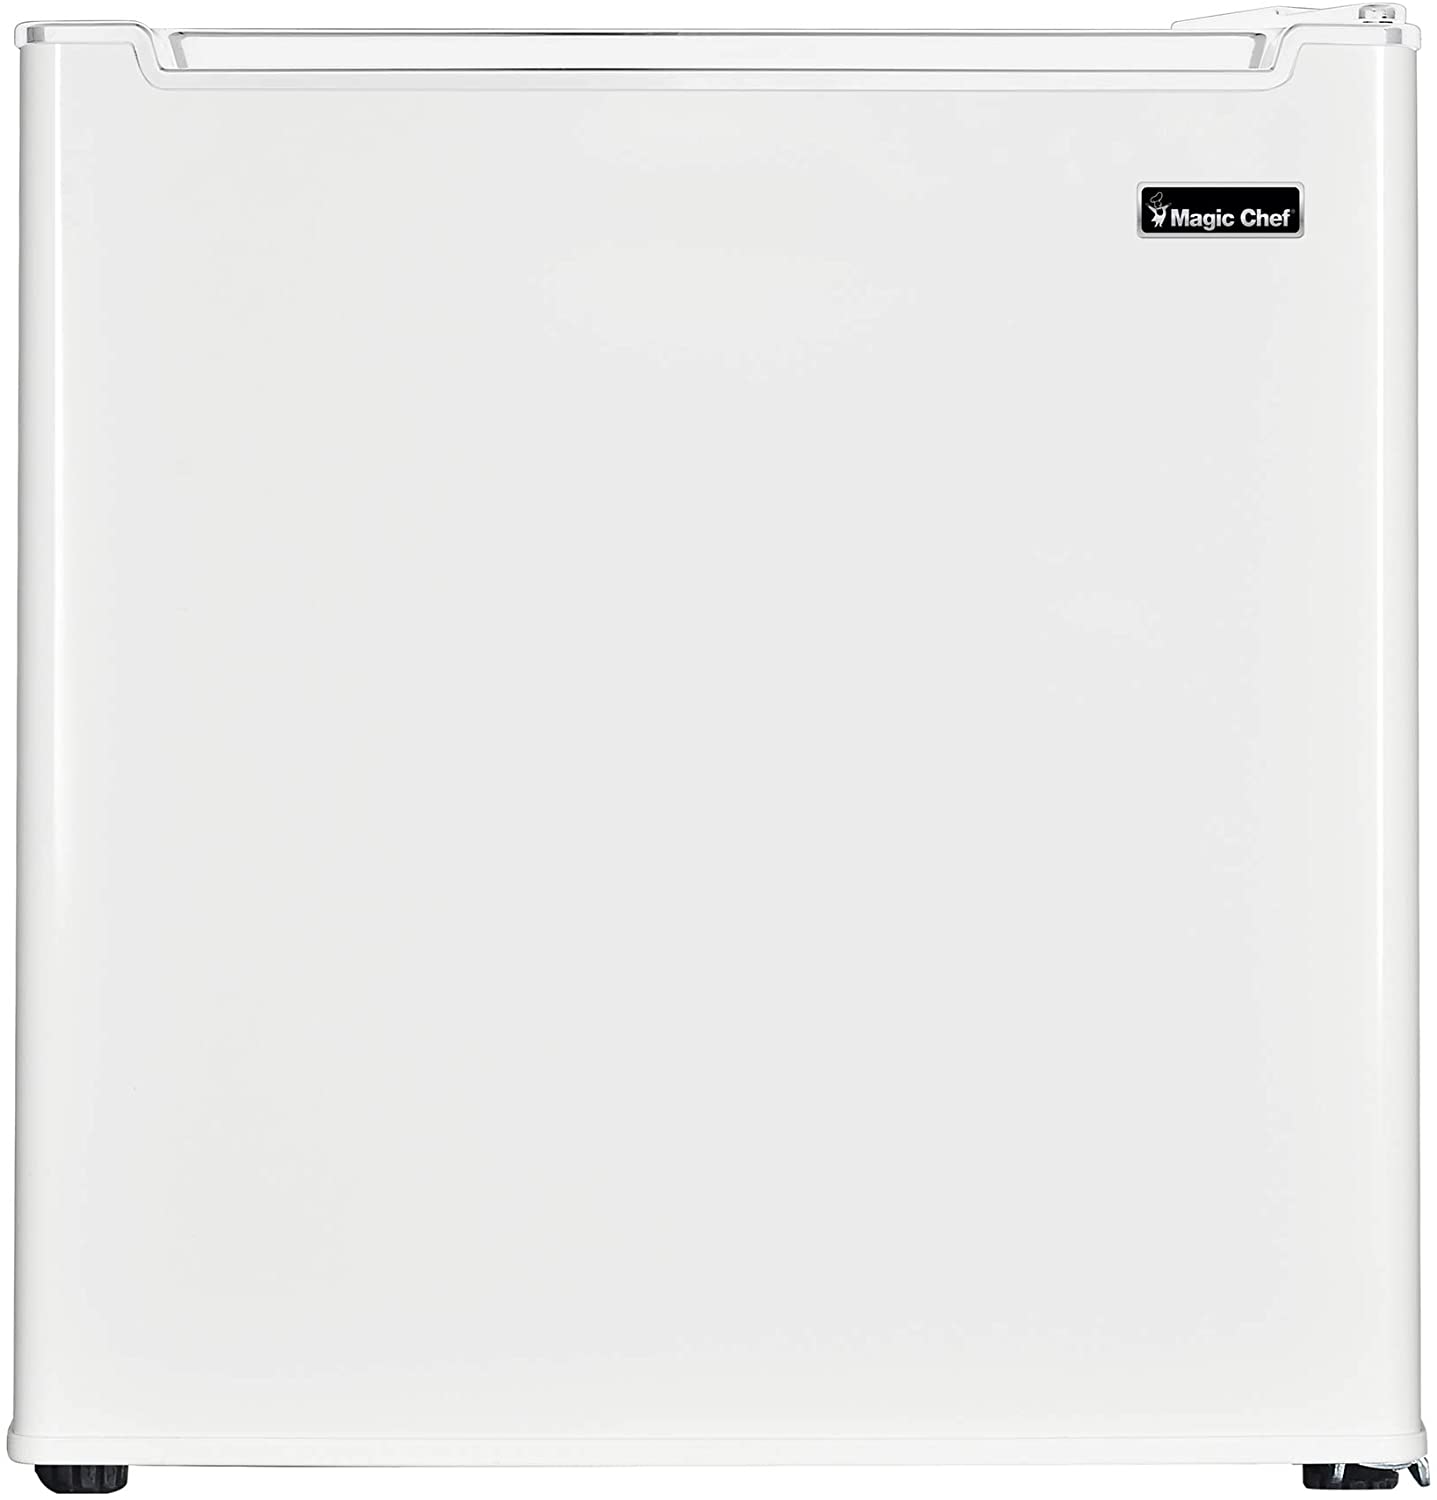  Magic Chef MCBR350S2 Compact Refrigerator with Manual Defrost,  Small Refrigerator for Compact Spaces, 3.5 Cubic Feet, Silver : Appliances